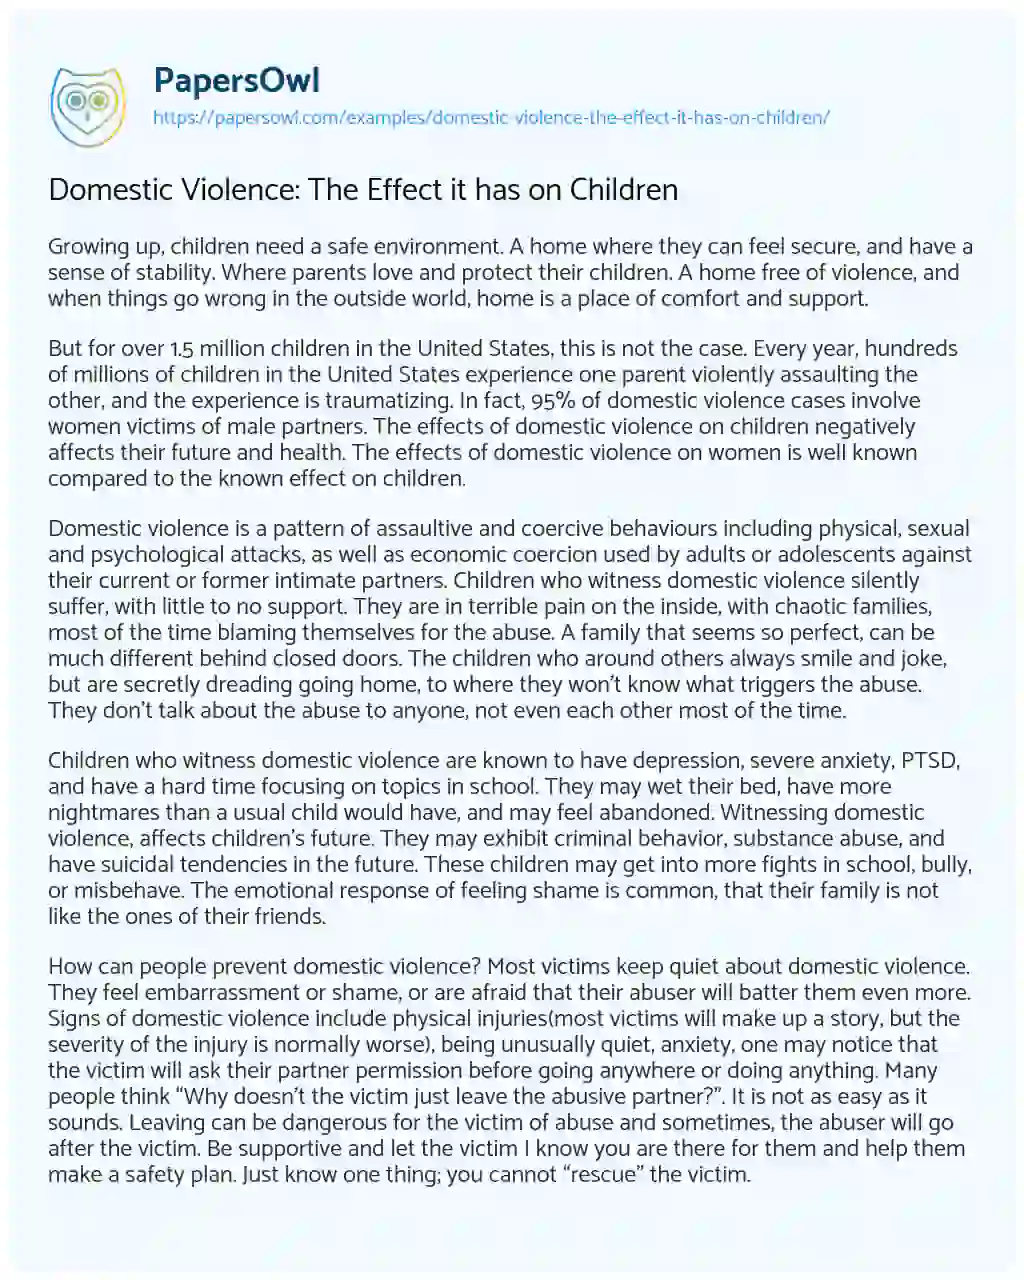 Domestic Violence: the Effect it has on Children essay